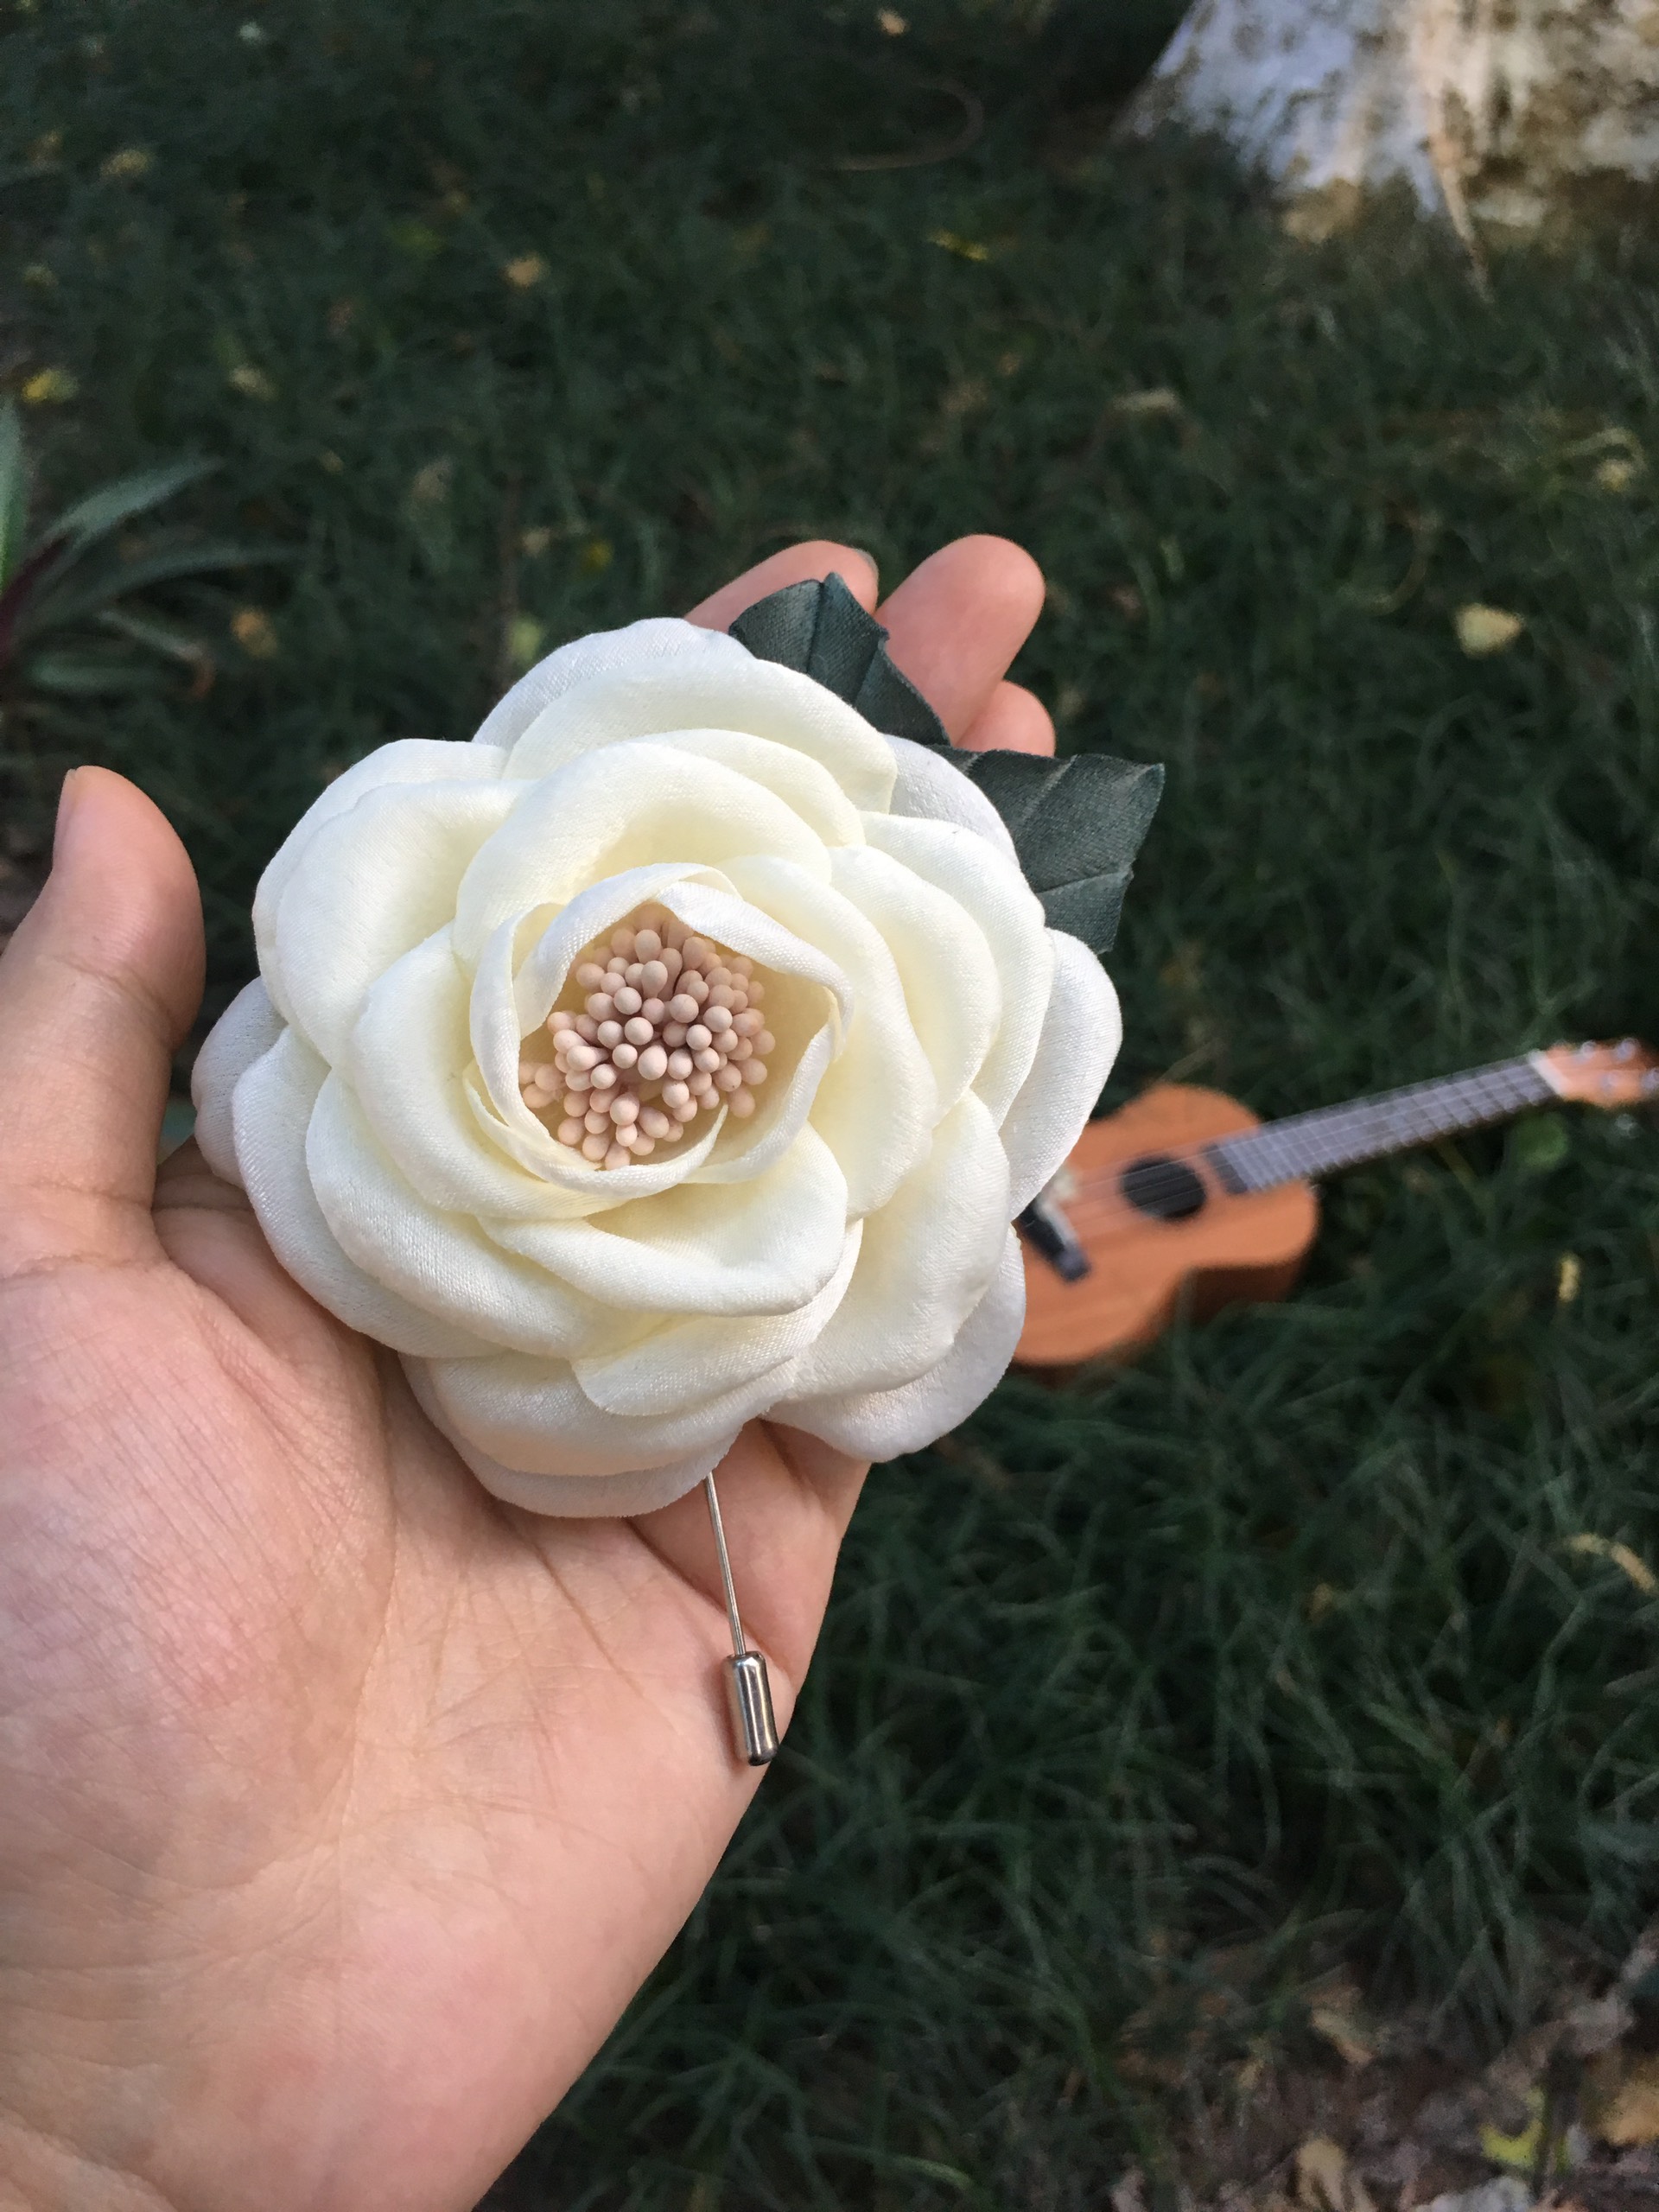 ND4 Off white Camellia Silk Fabric Flower Pin Brooch With Gift Box Camellia Brooch Pin Lovely Handmade Gift